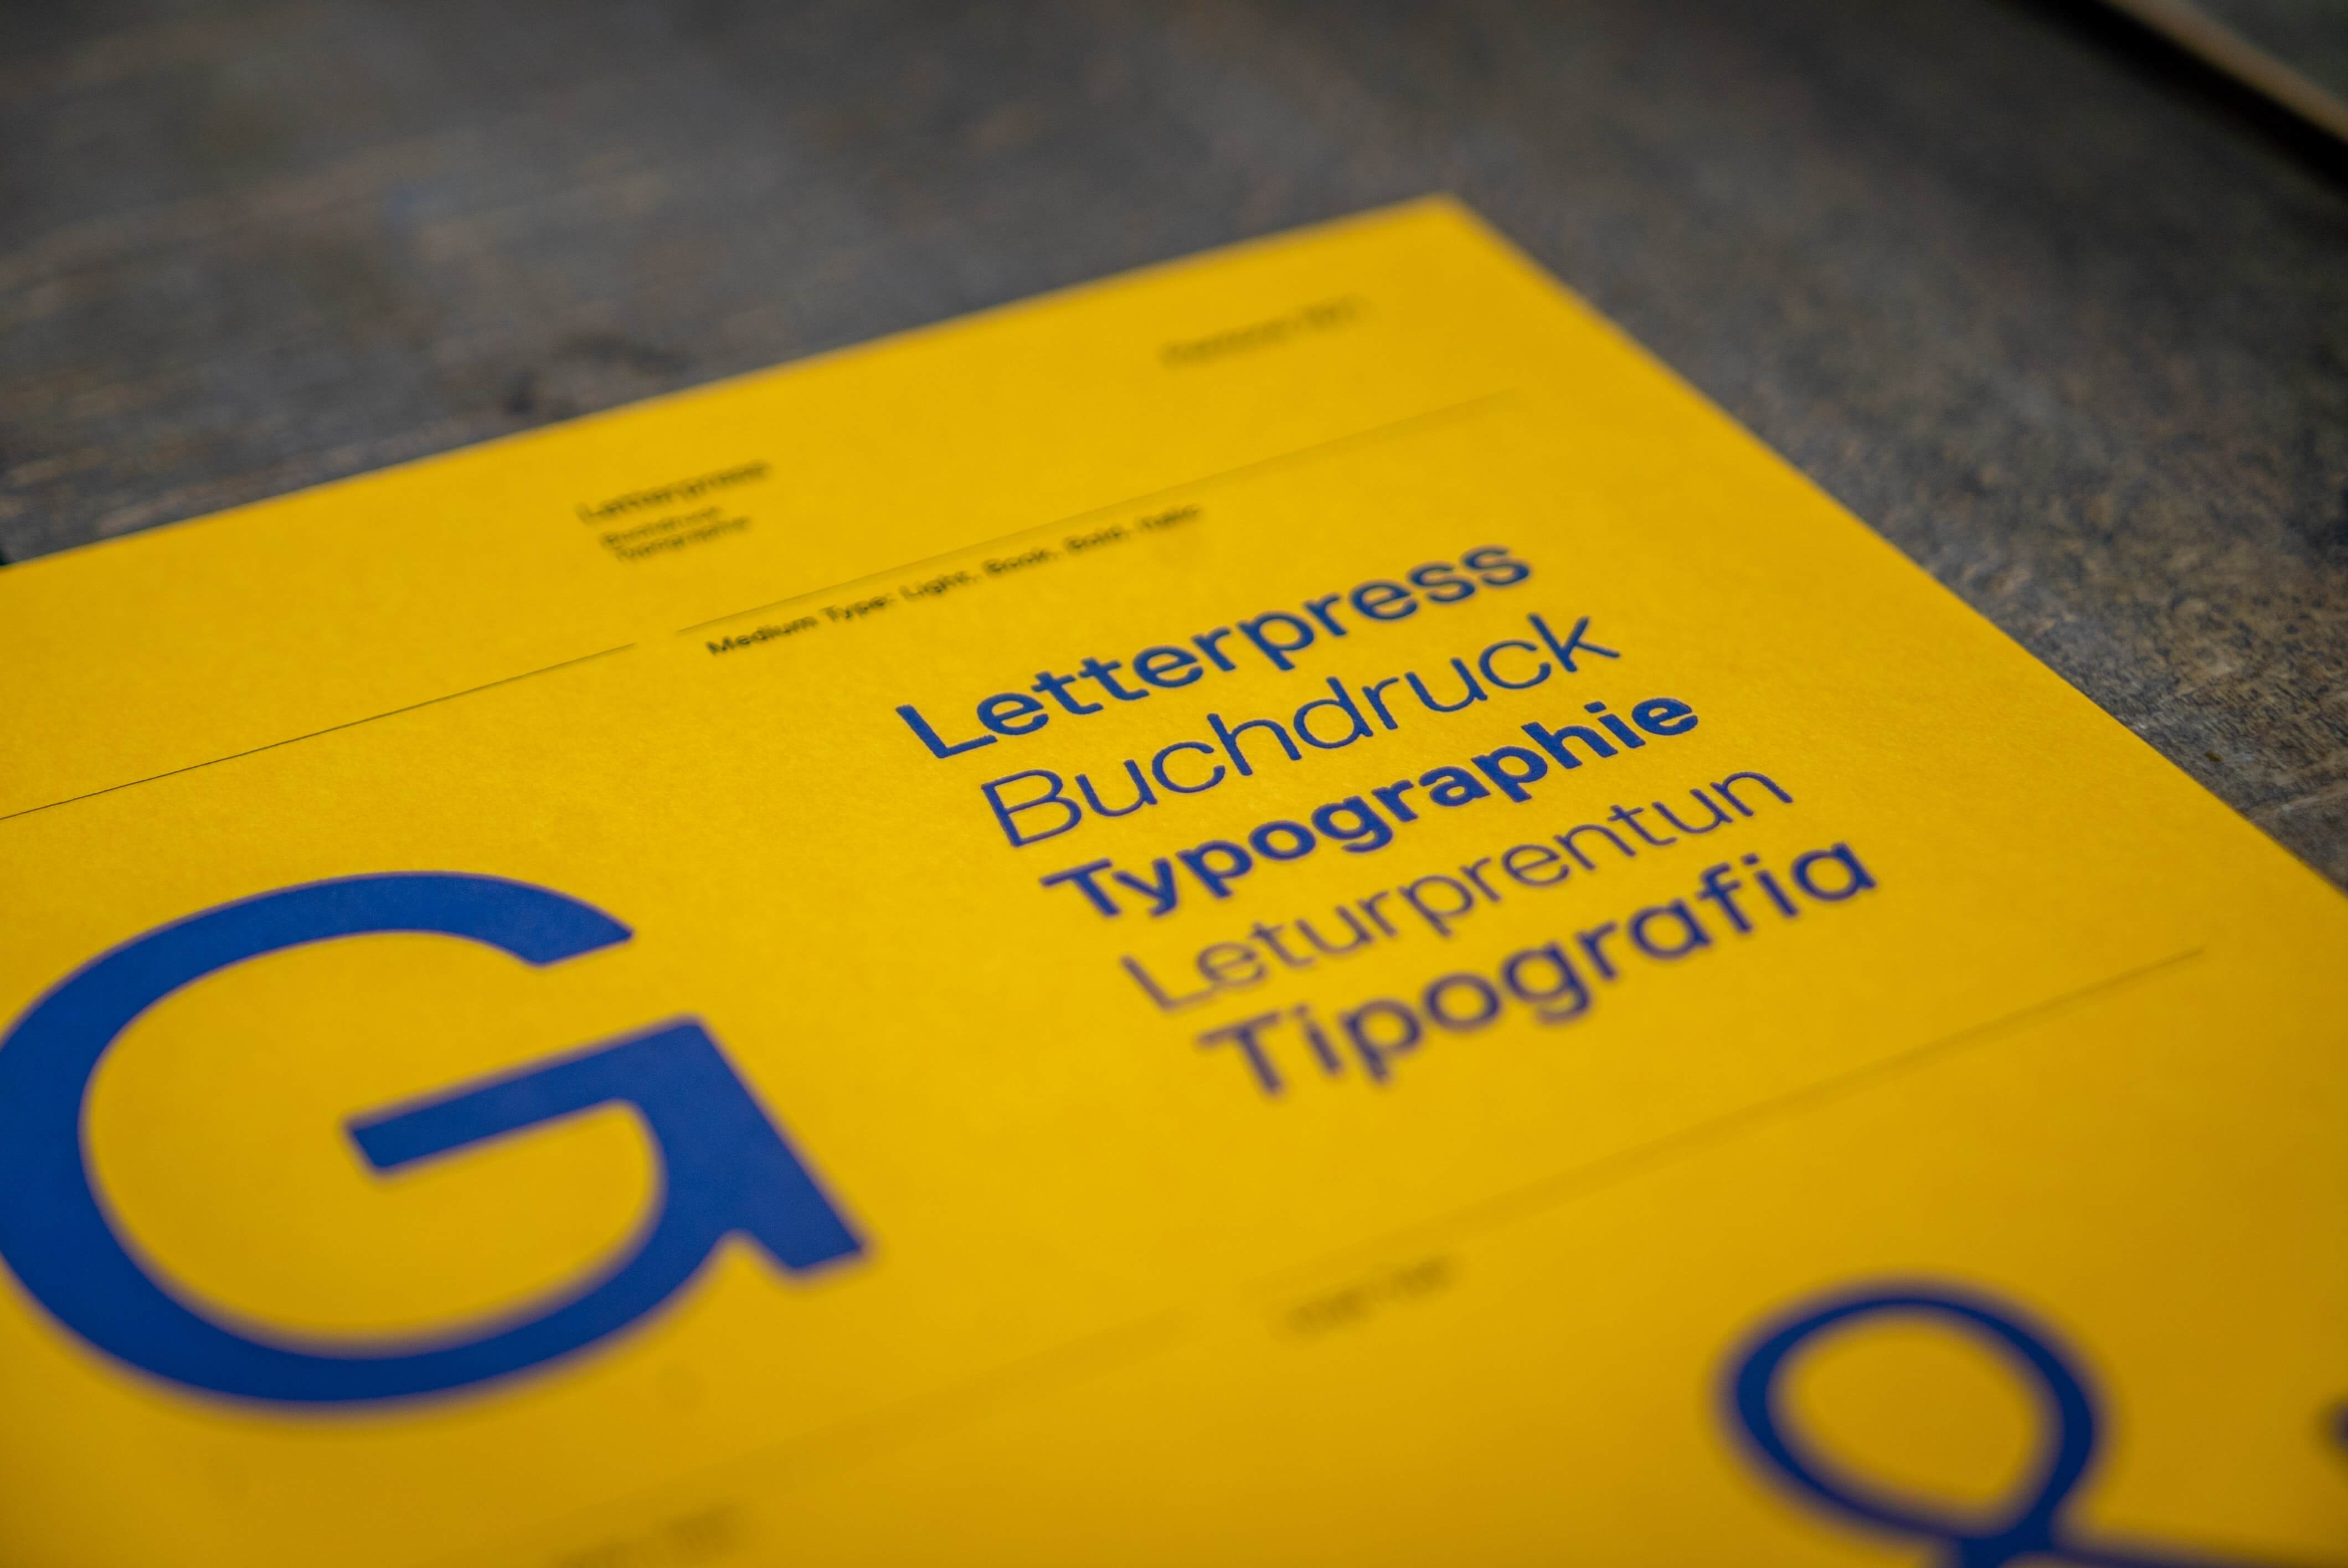 The upper right corner of a yellow book cover with the word Letterpress in five languages